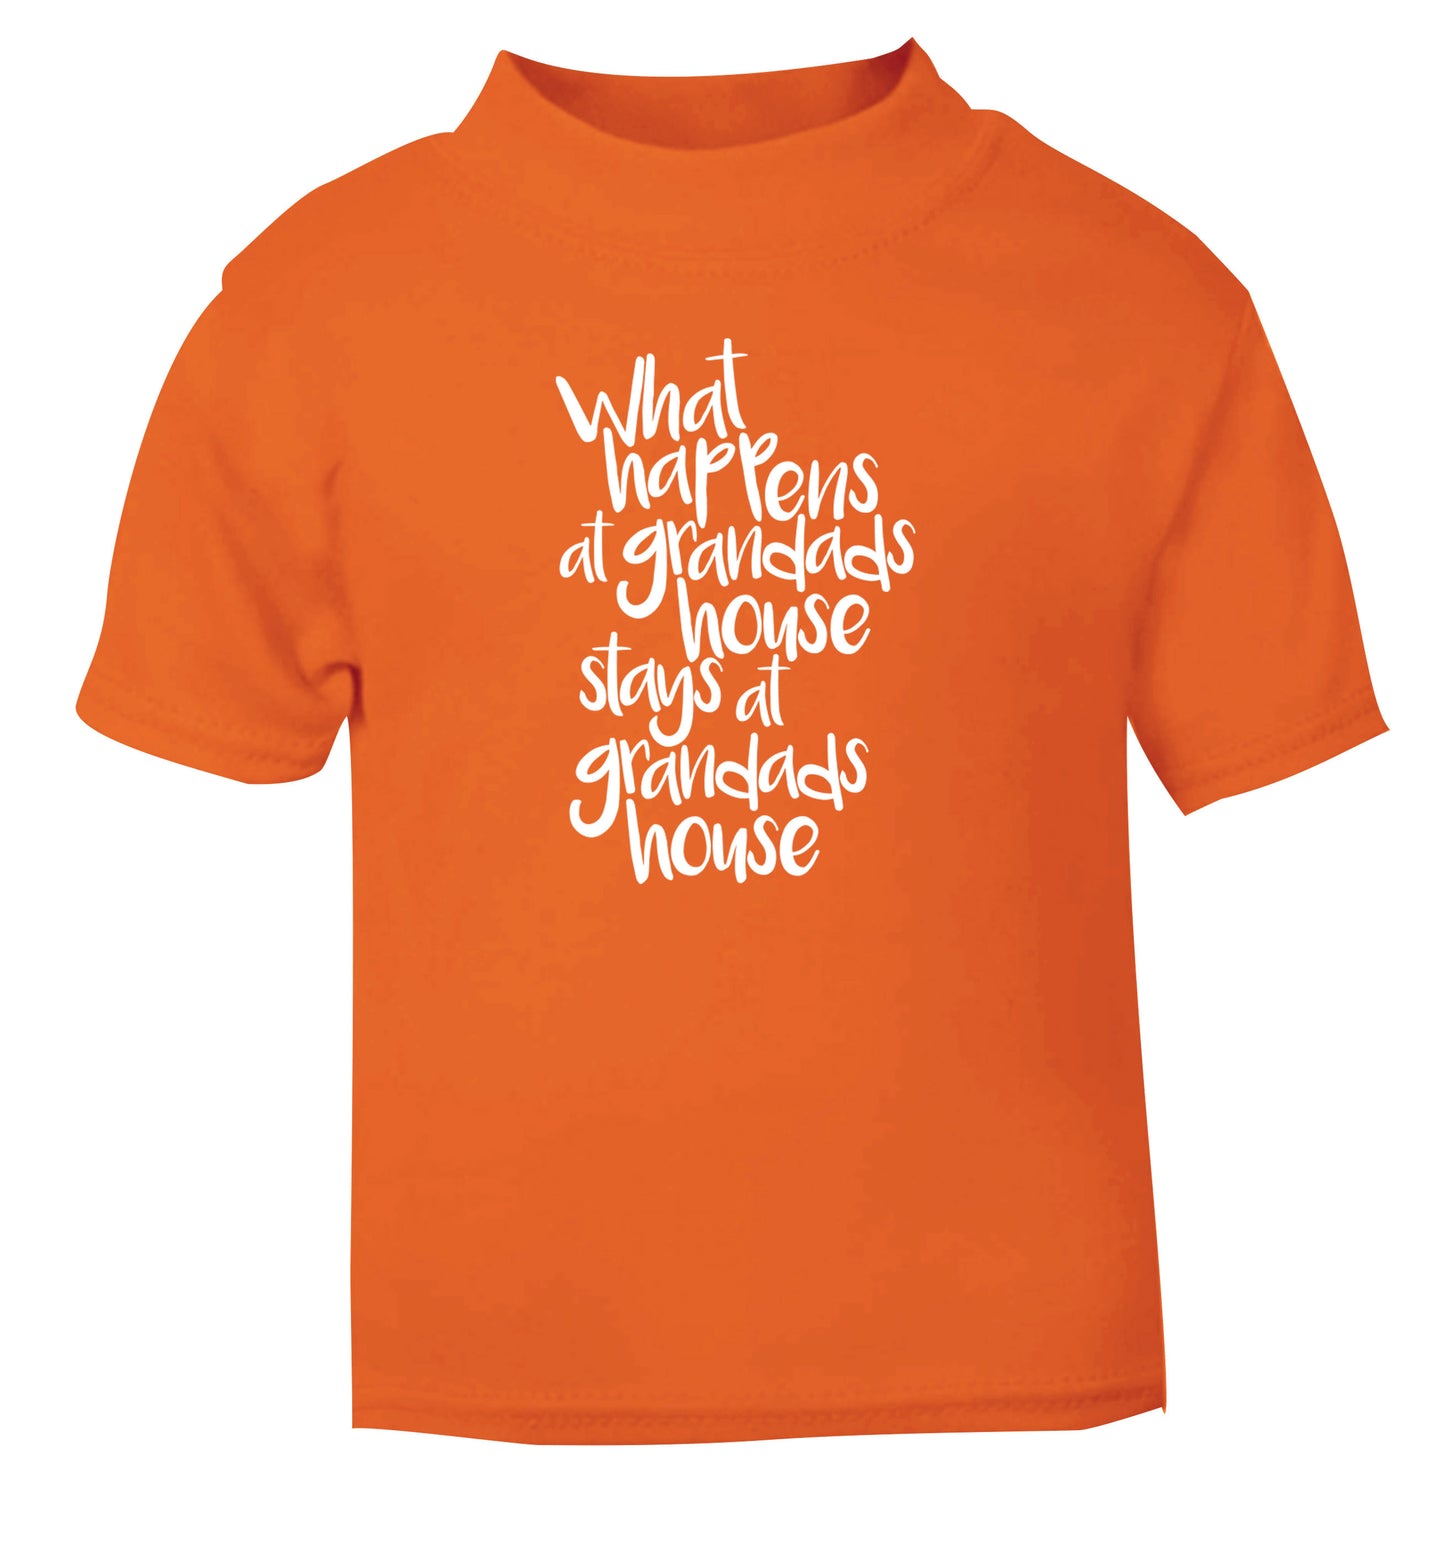 What happens at grandads house stays at grandads house orange Baby Toddler Tshirt 2 Years